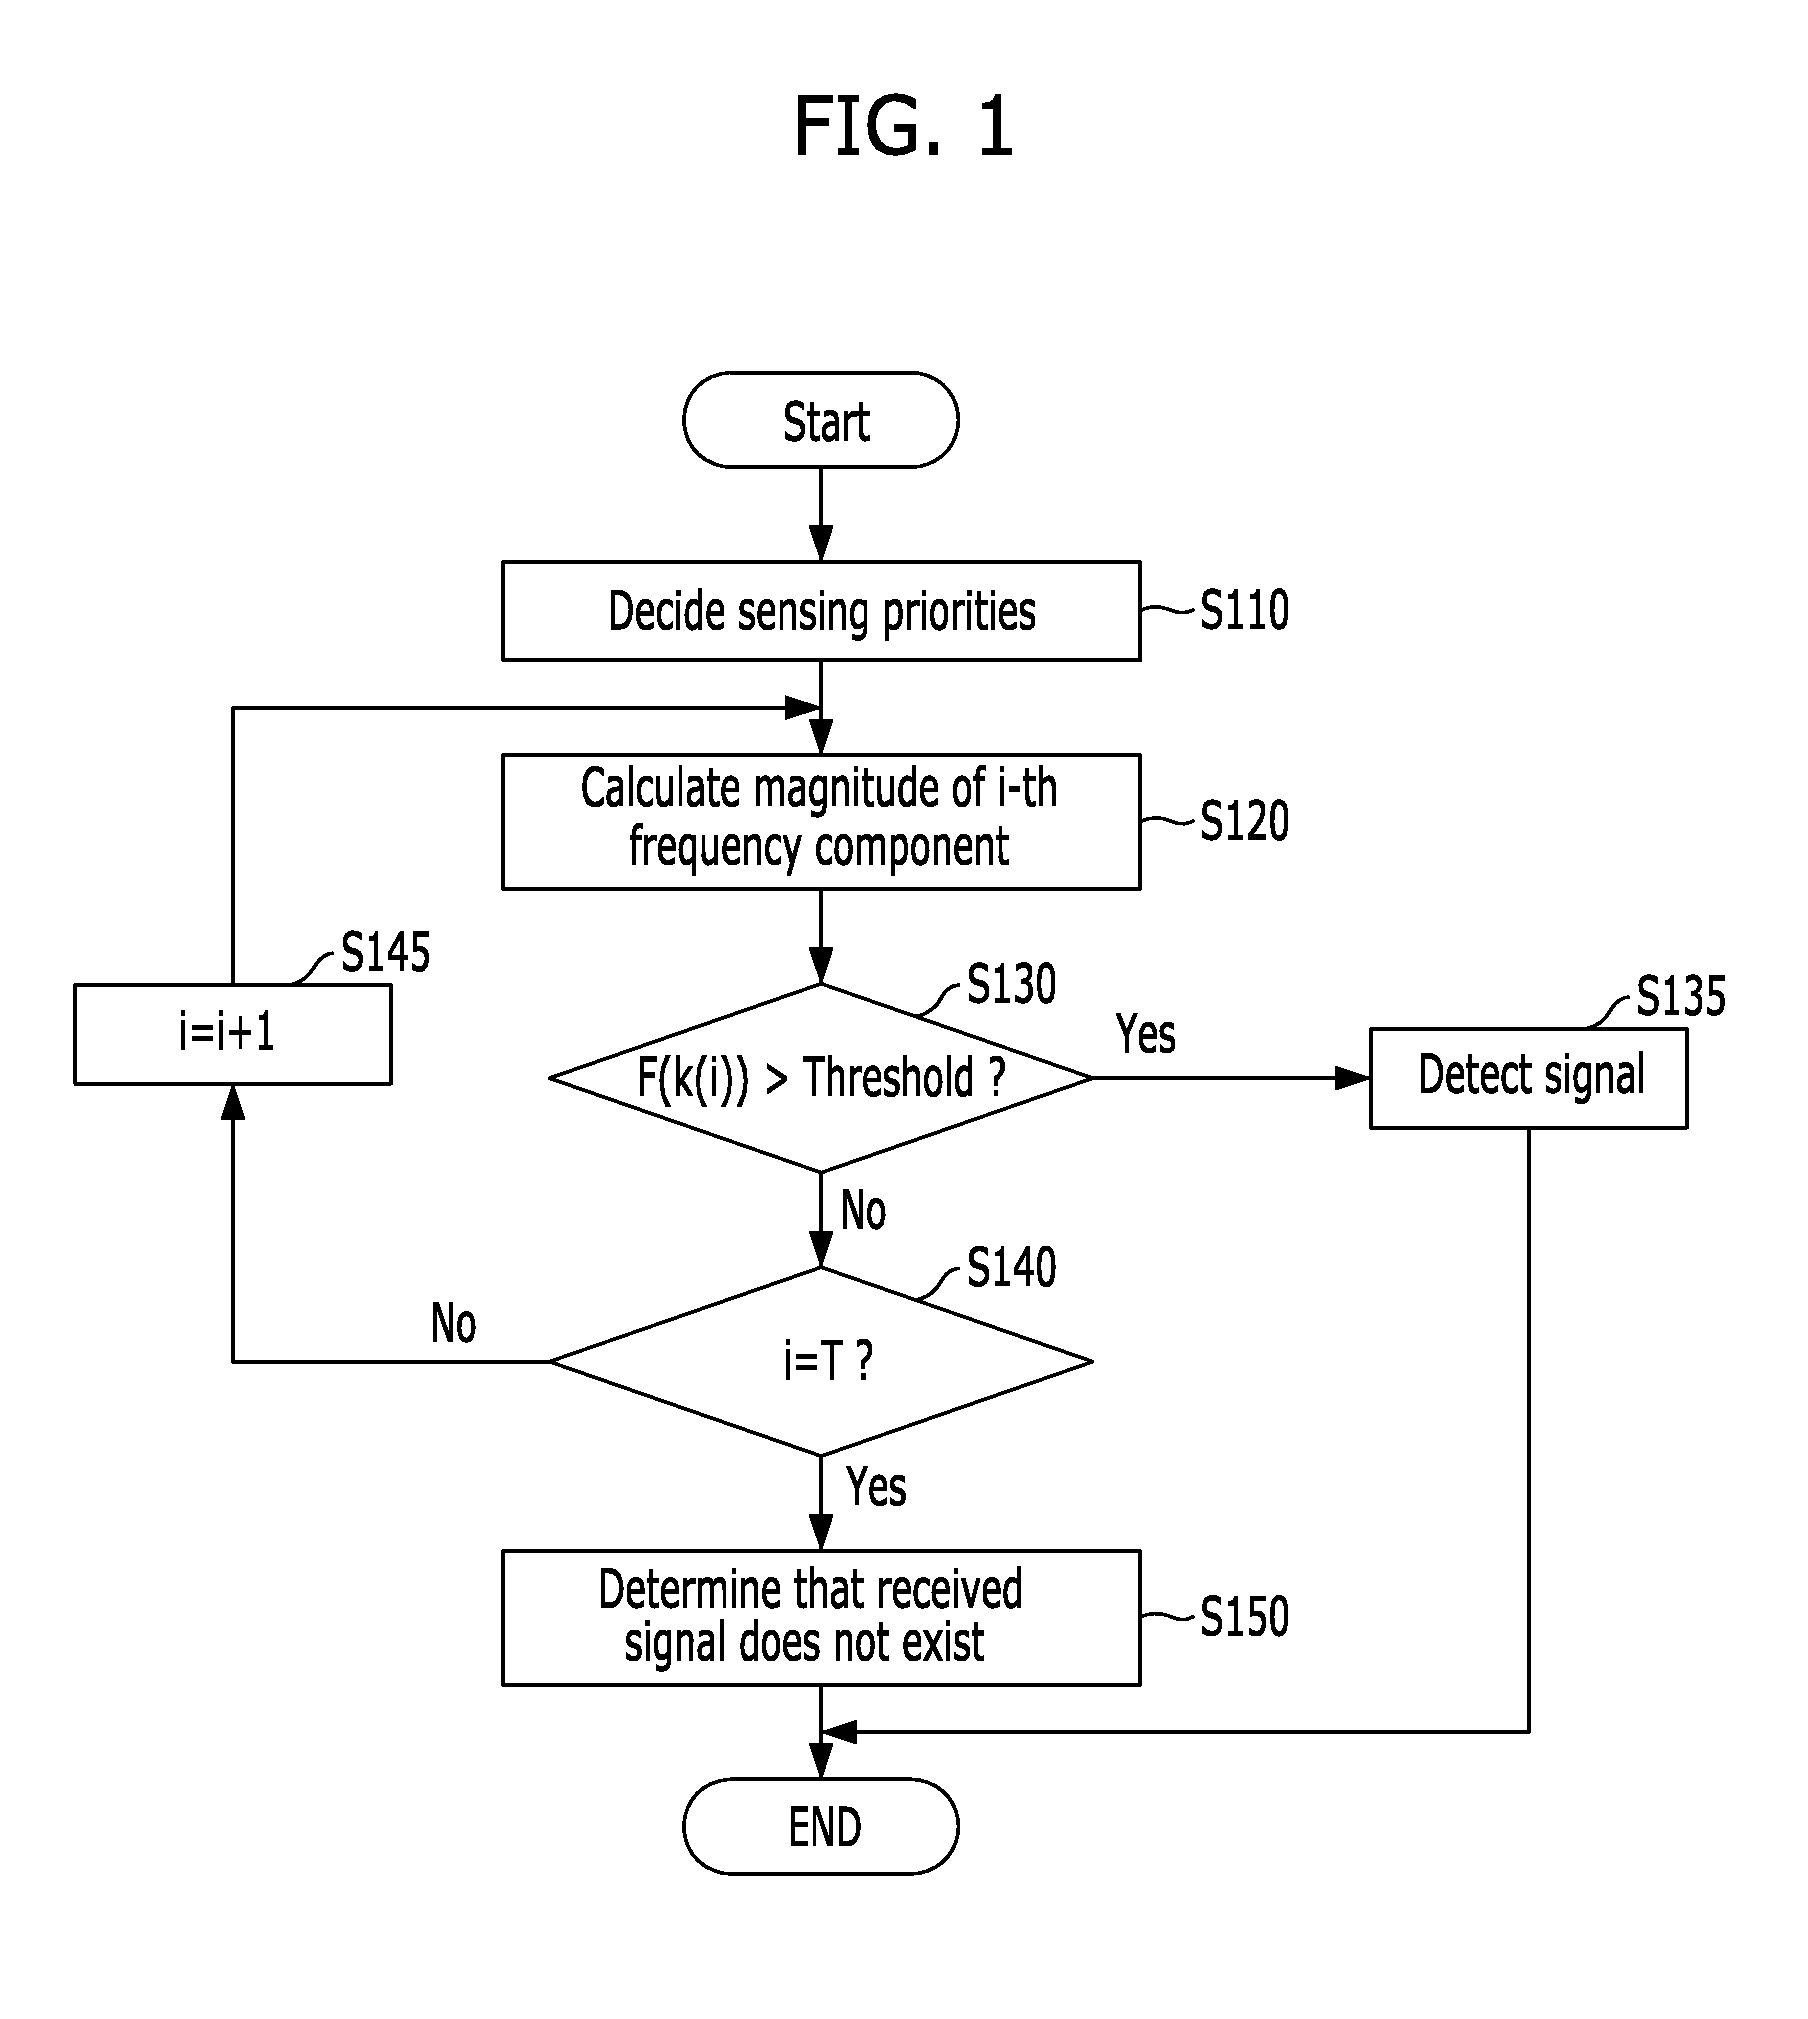 Method and apparatus for detecting received signal in wireless communication system